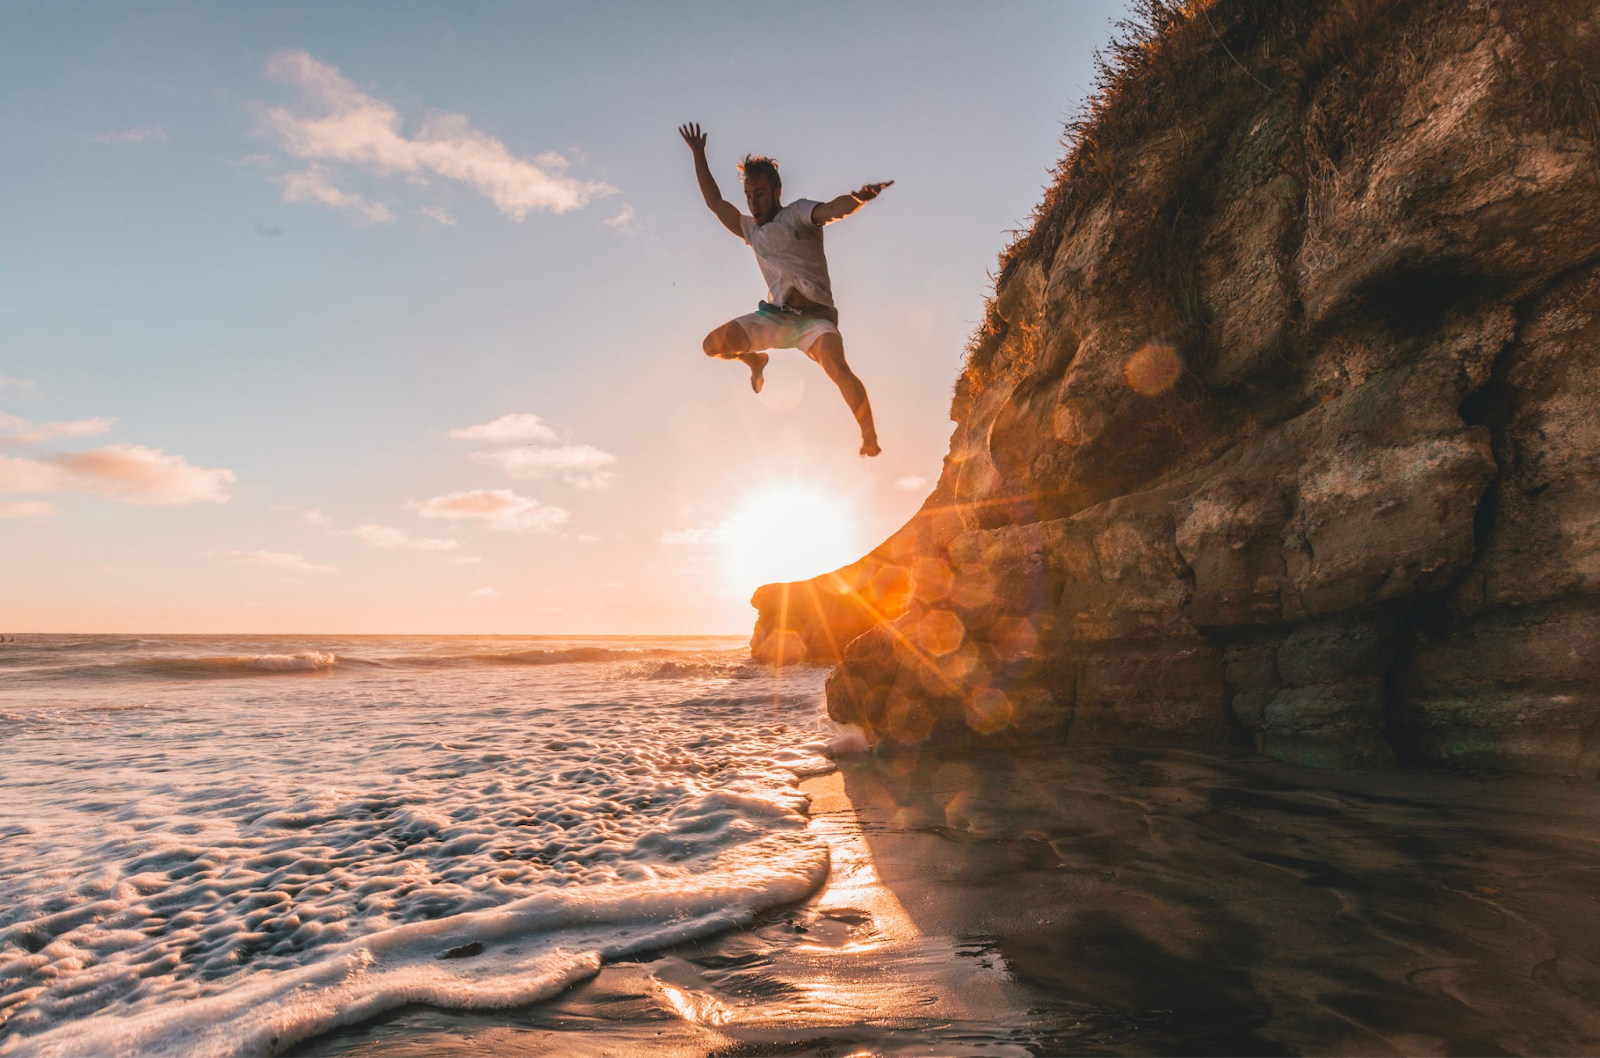 A man jumping off a cliff into the ocean on a hot summer day